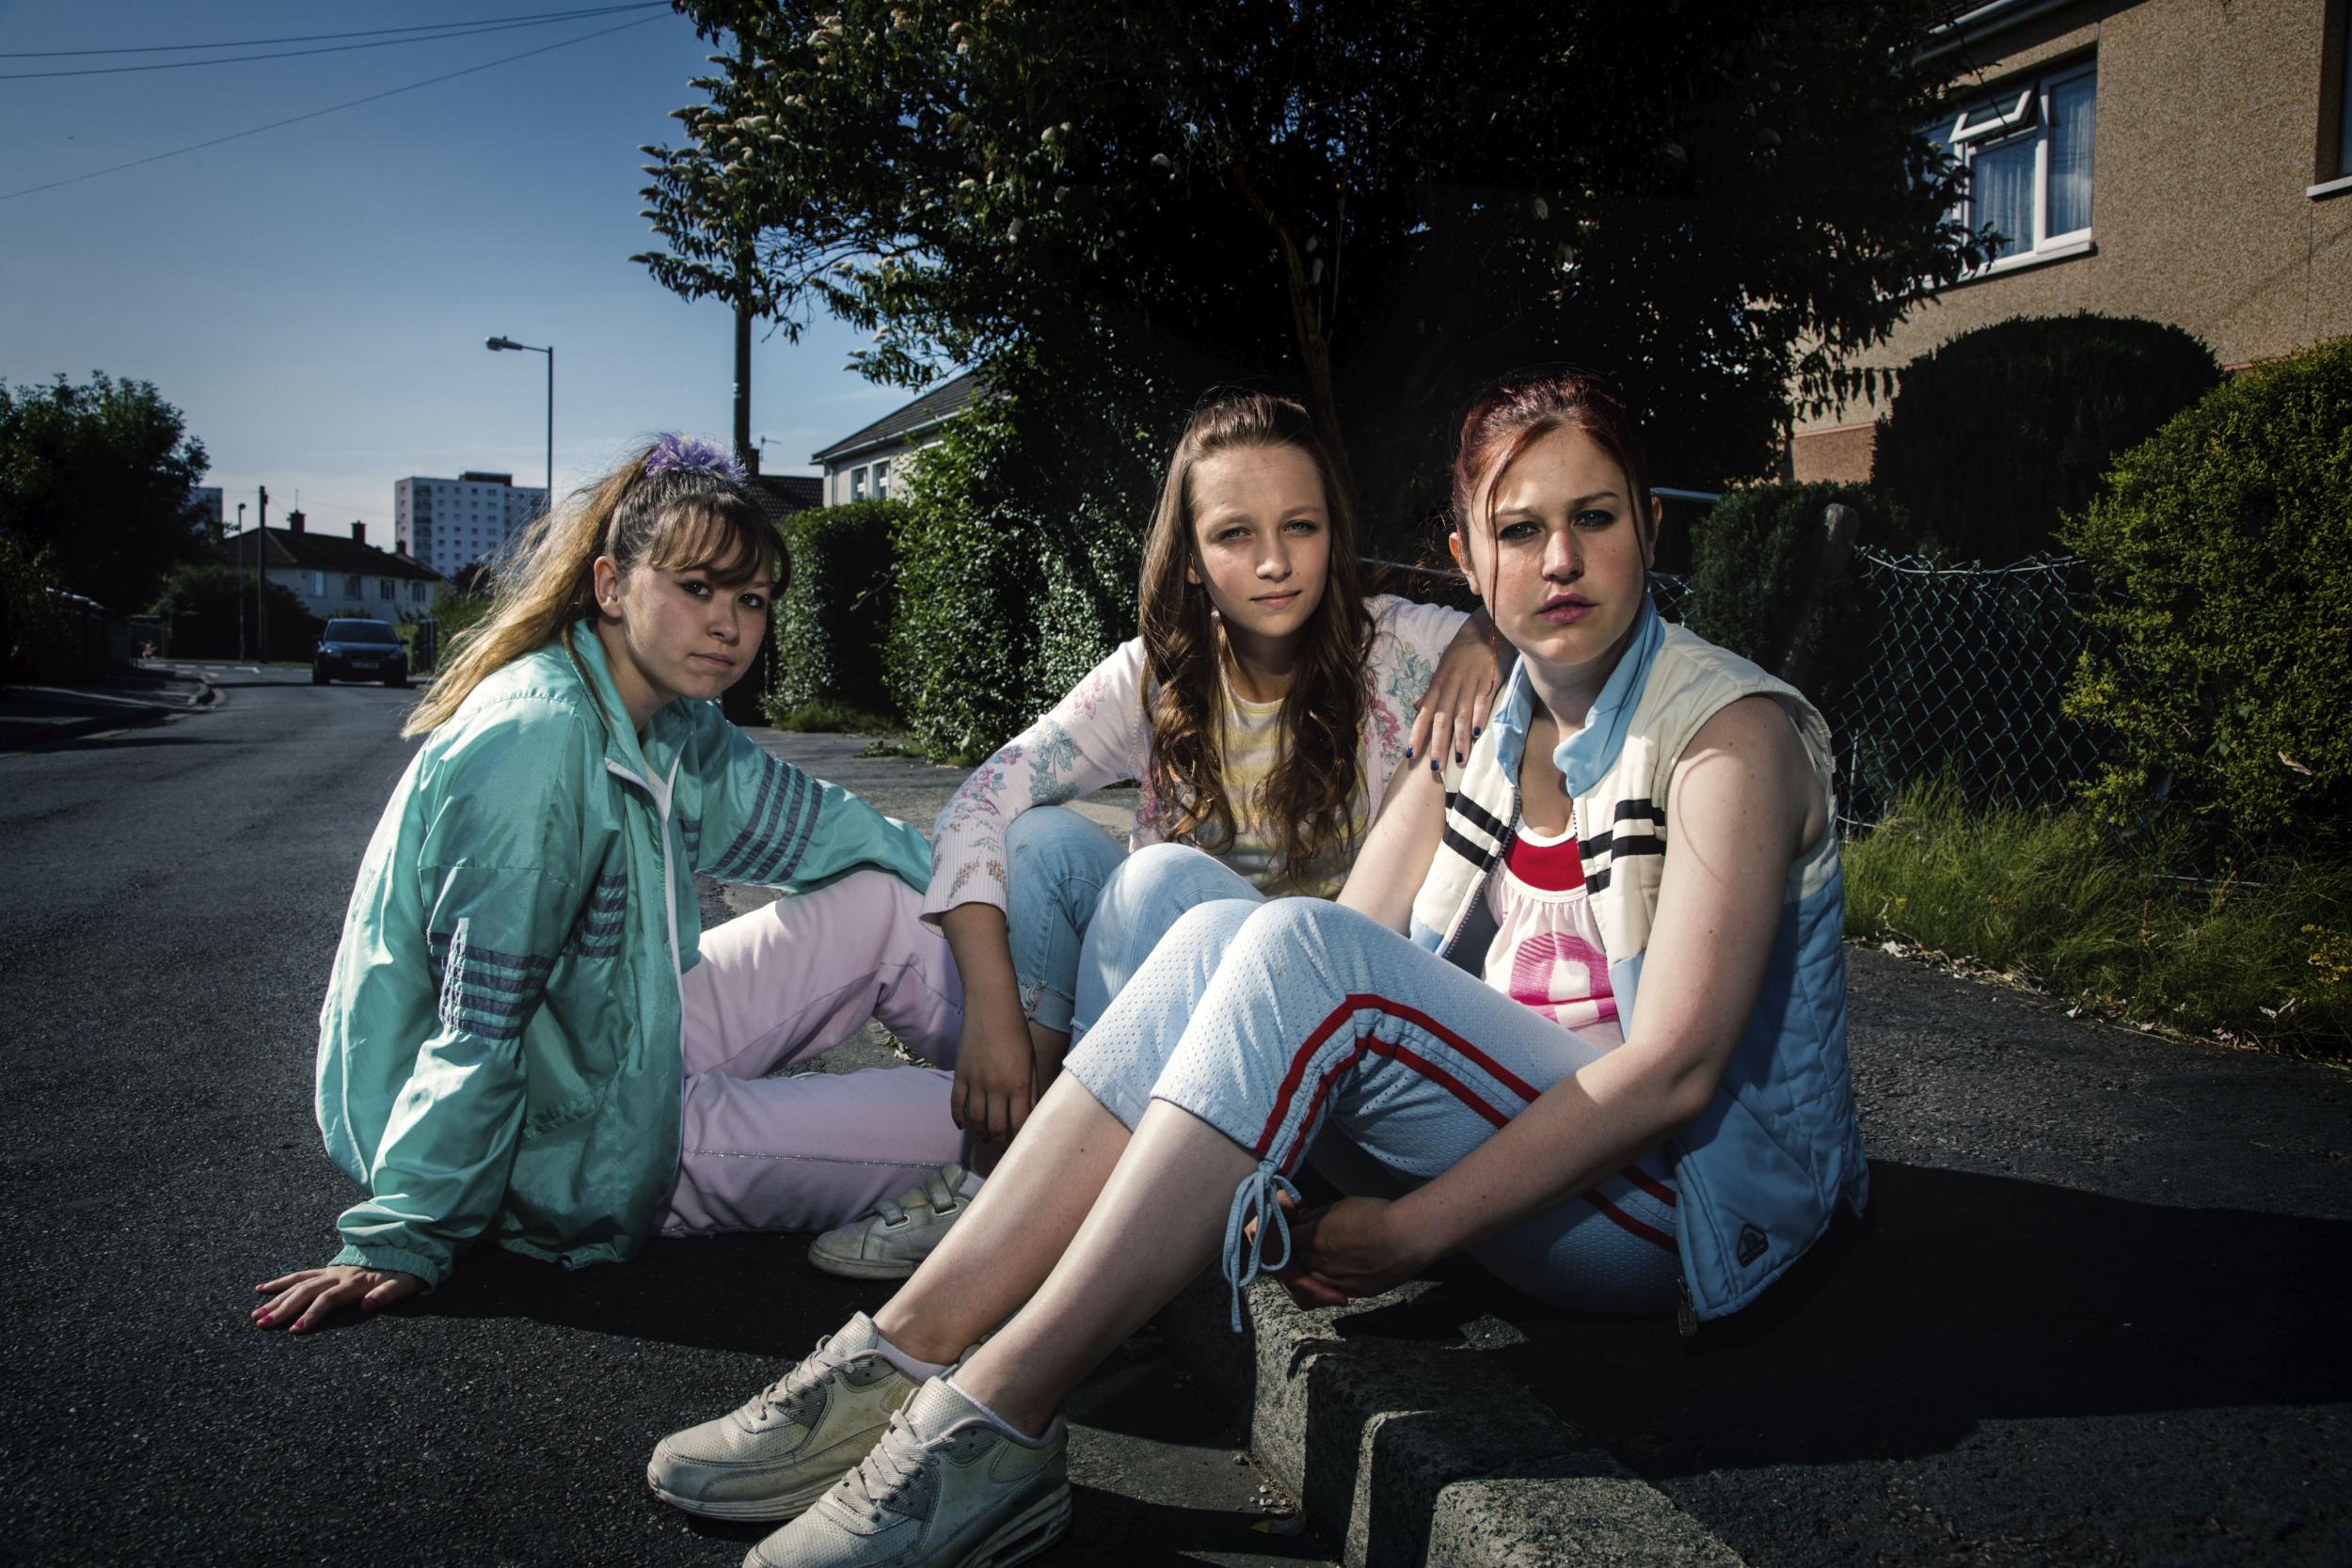 Three girls, three victims: ((from left) Liv Hill, Molly Windsor and Ria Zmitrowicz star in this harrowing dramatisation